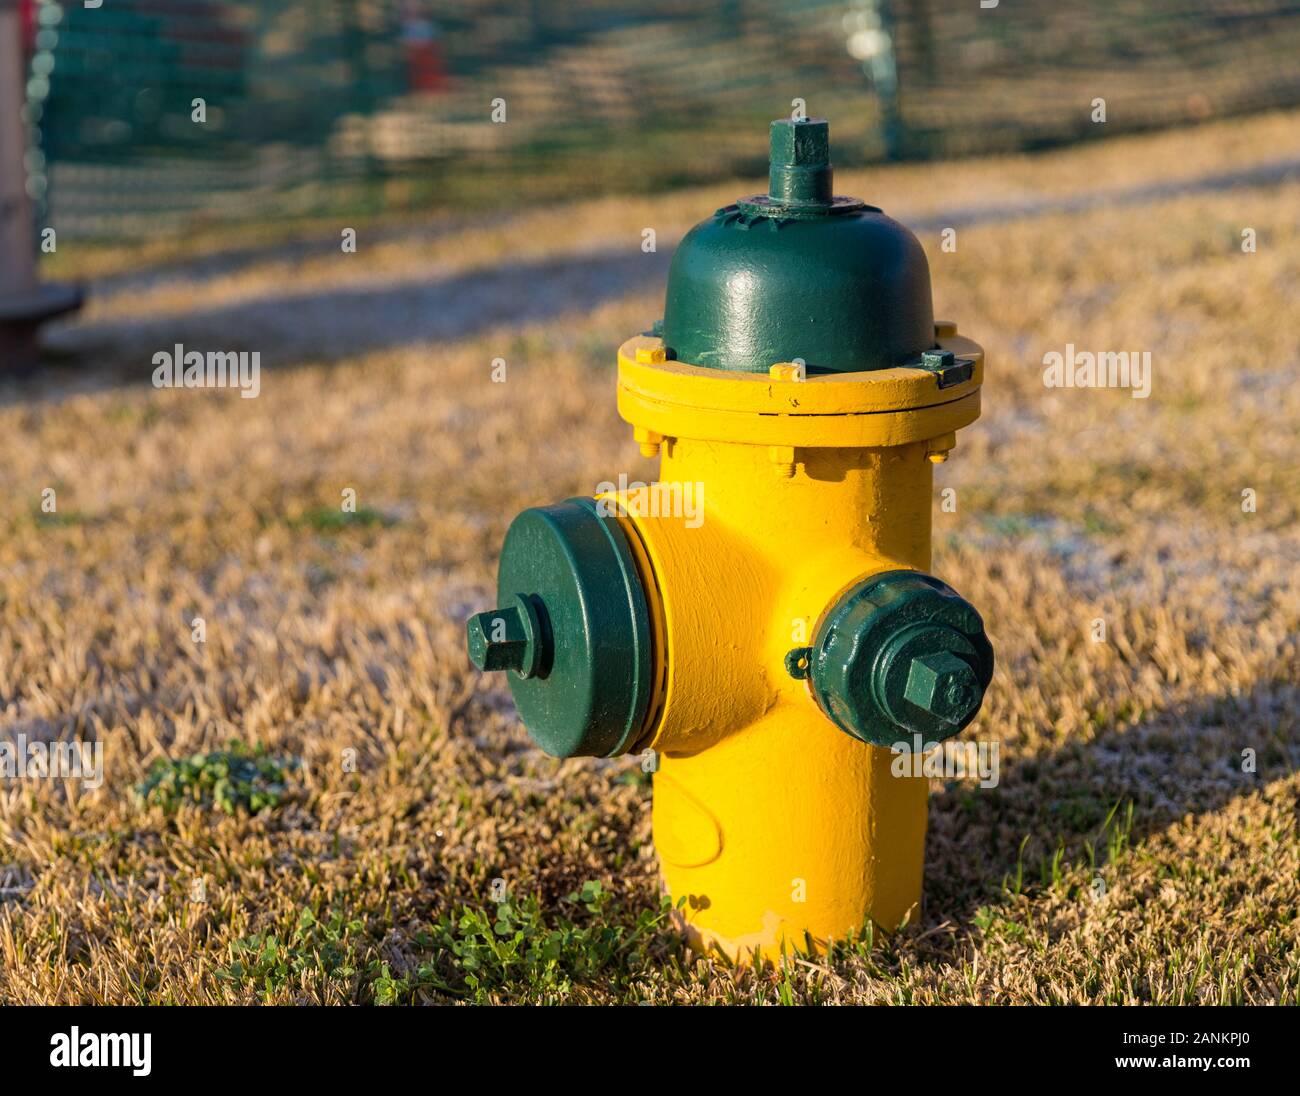 Colorful Yellow and Green Fire Hydrant used for supplying high volume of water Stock Photo